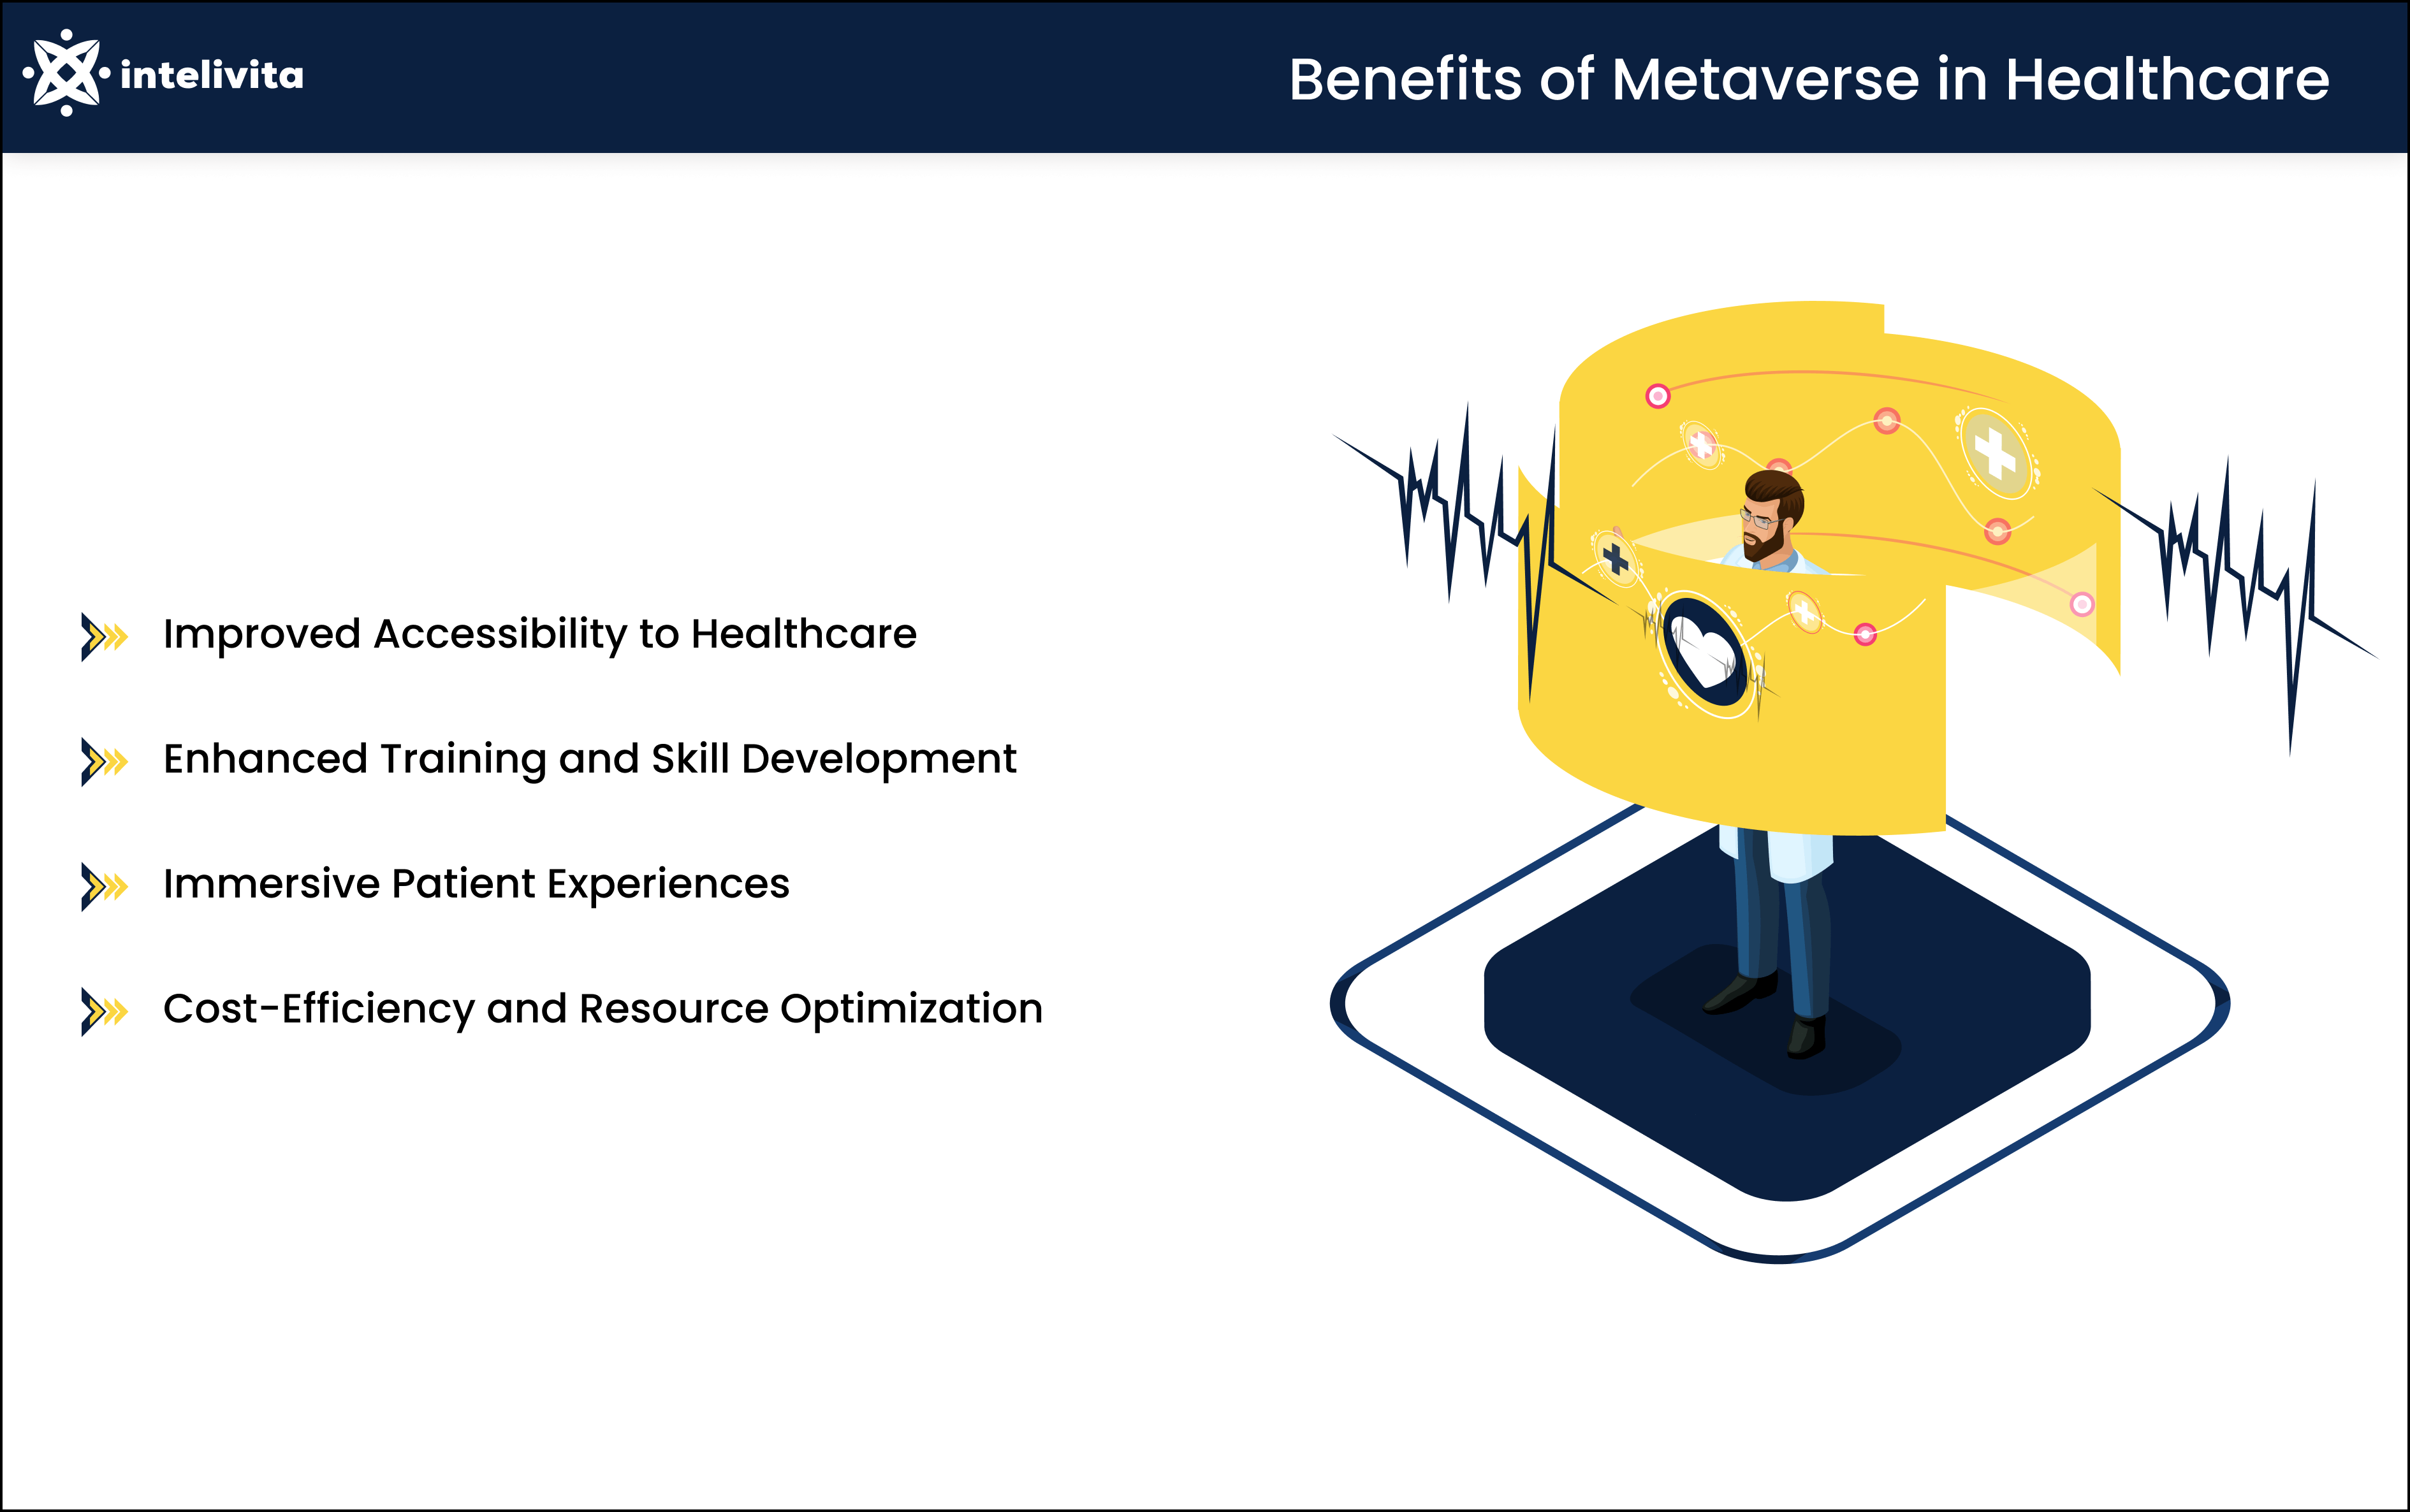 Benefits of Metaverse in Healthcare: Accessibility, Training, Immersive Experiences, Cost-Efficiency